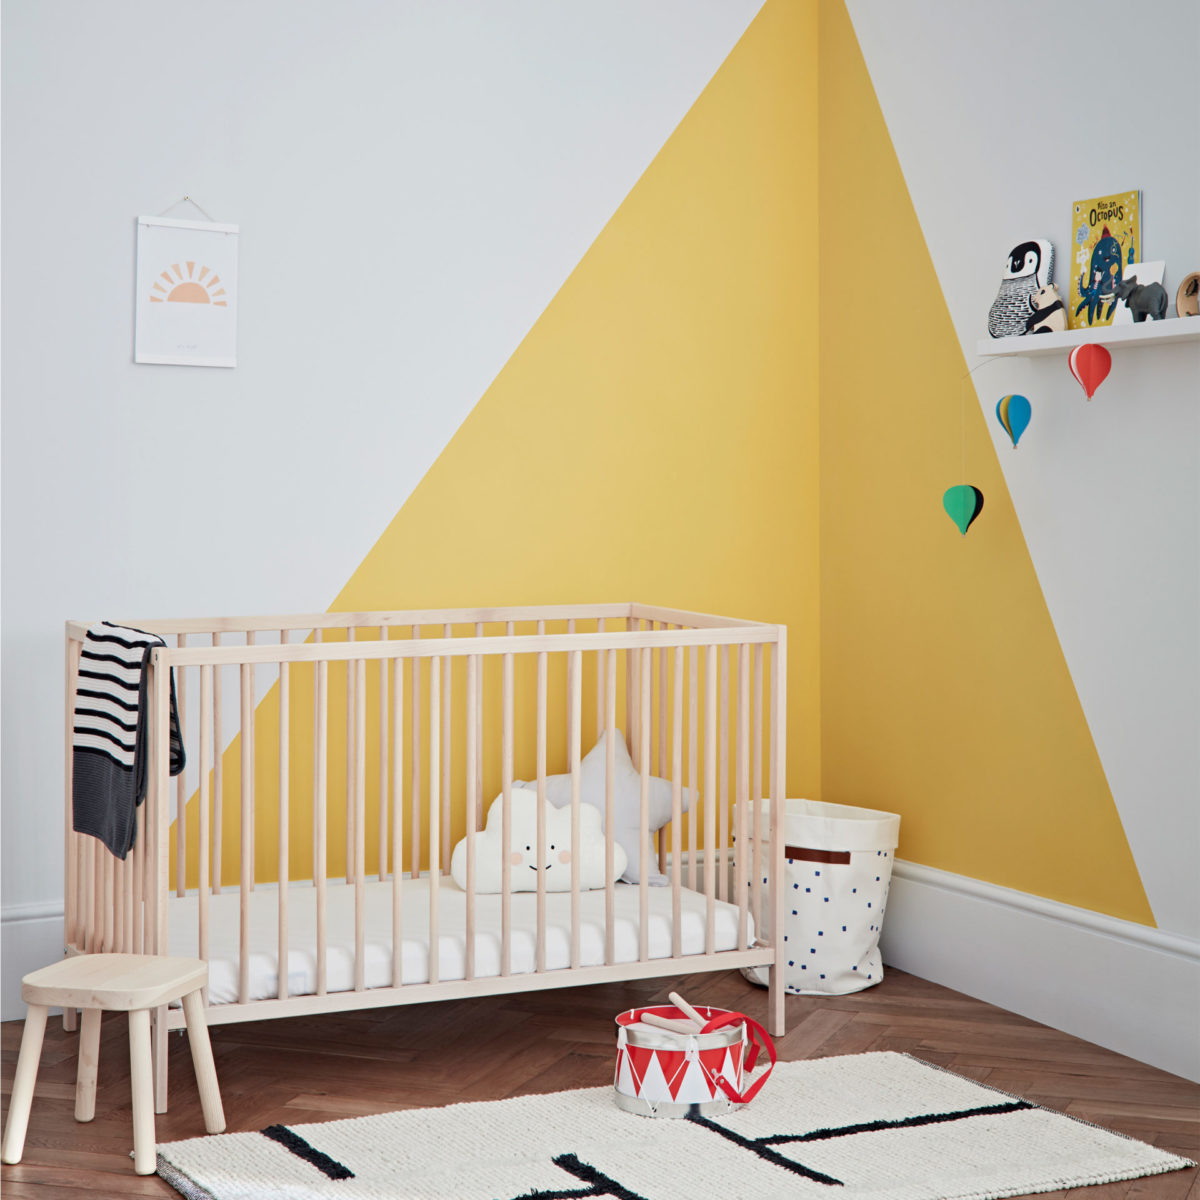 child’s bedroom with cot, toys and mustard triangles on white walls